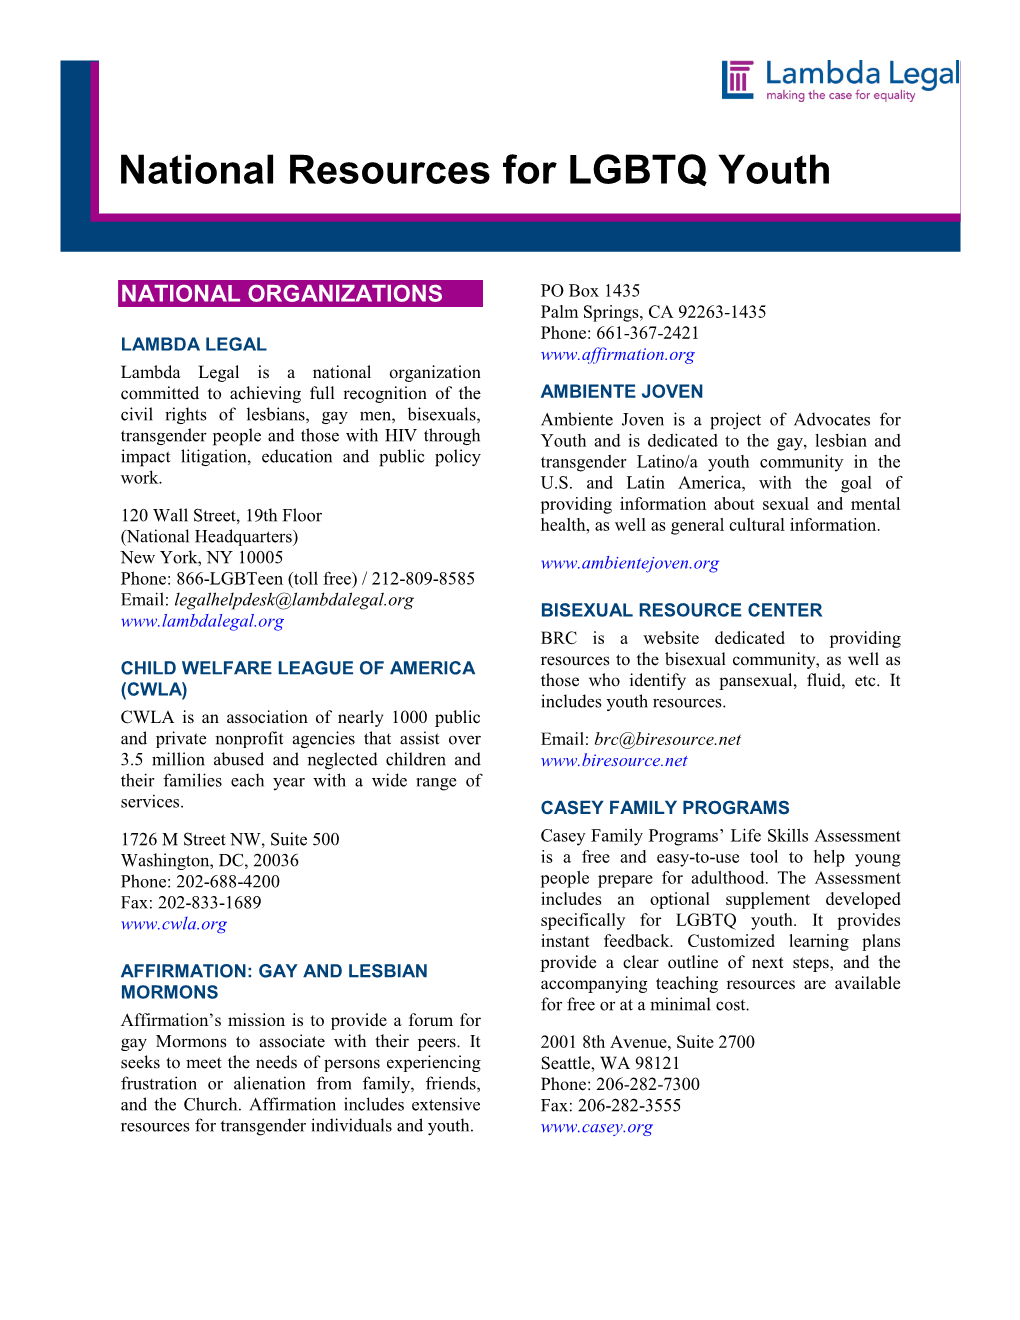 National Resources for LGBTQ Youth